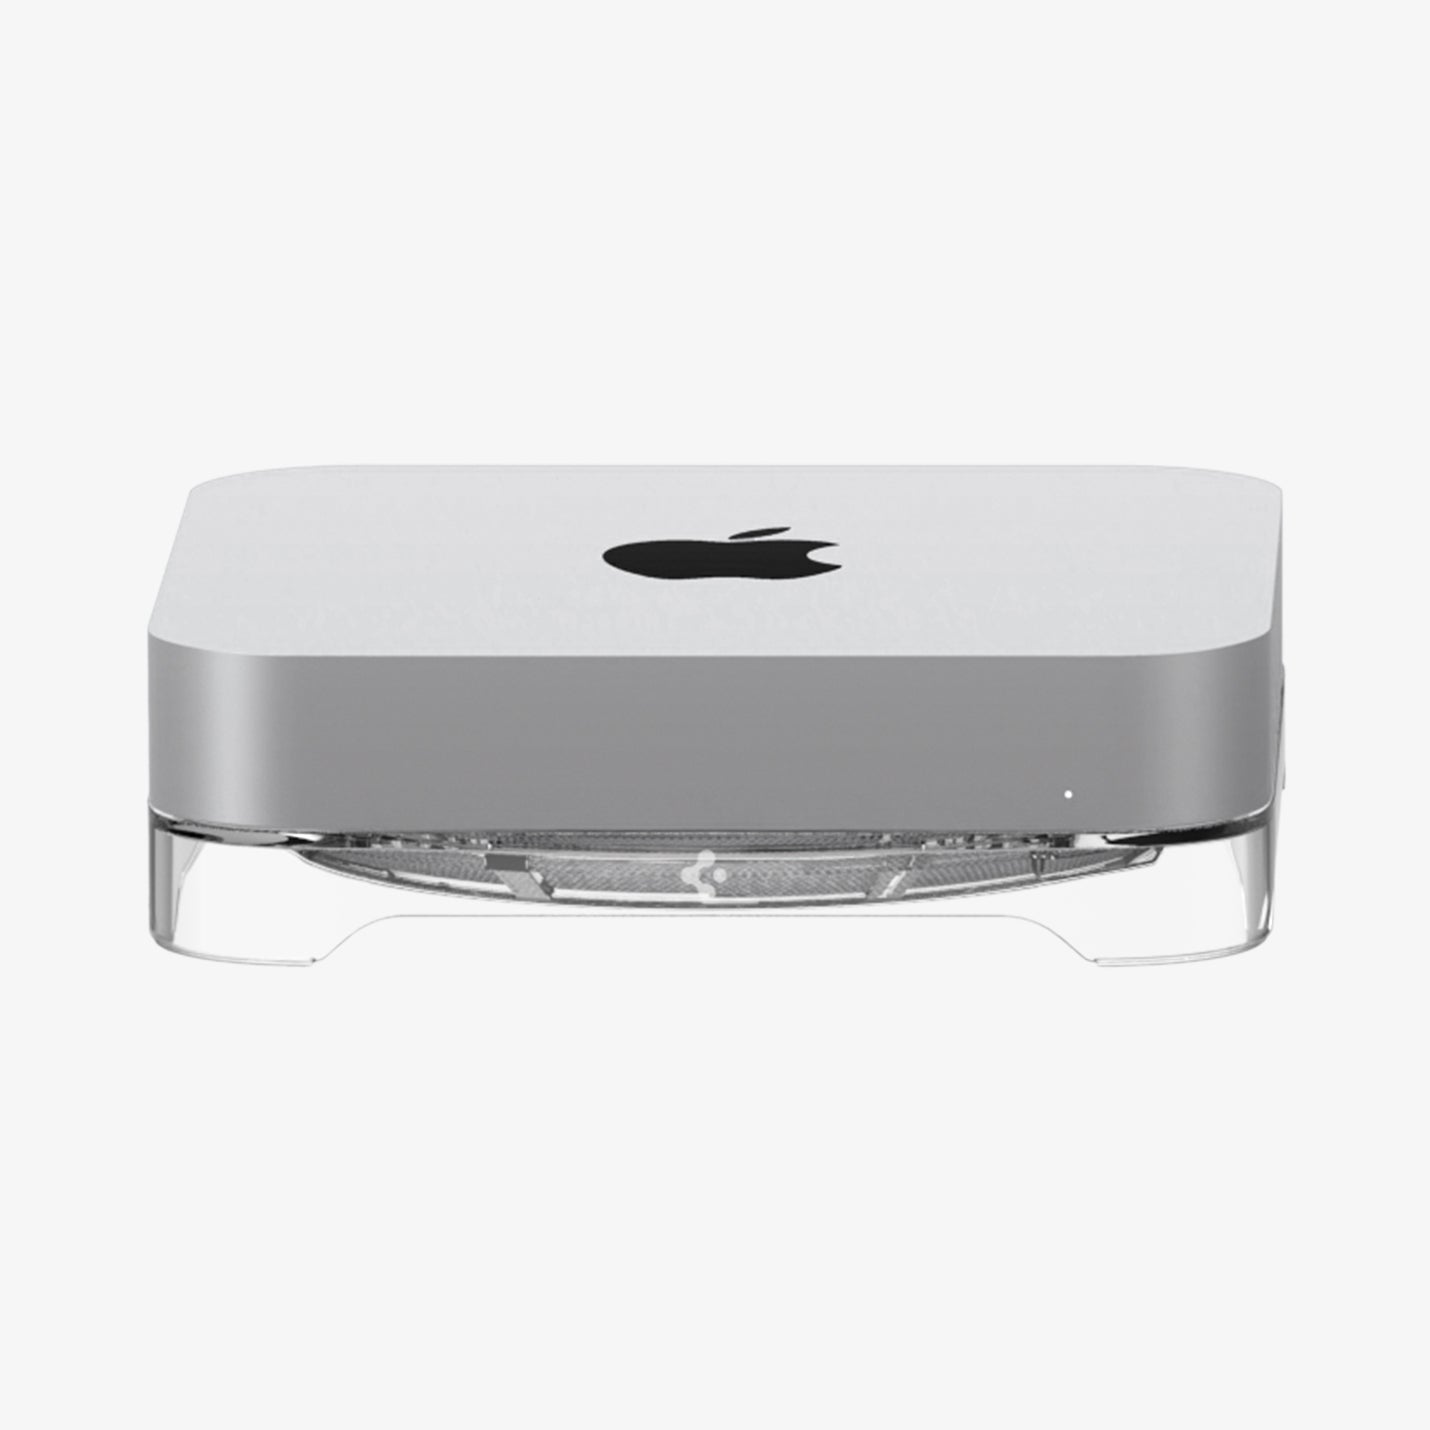 AMP06150 - Apple Mac Mini Stand in crystal clear showing the front and partial top